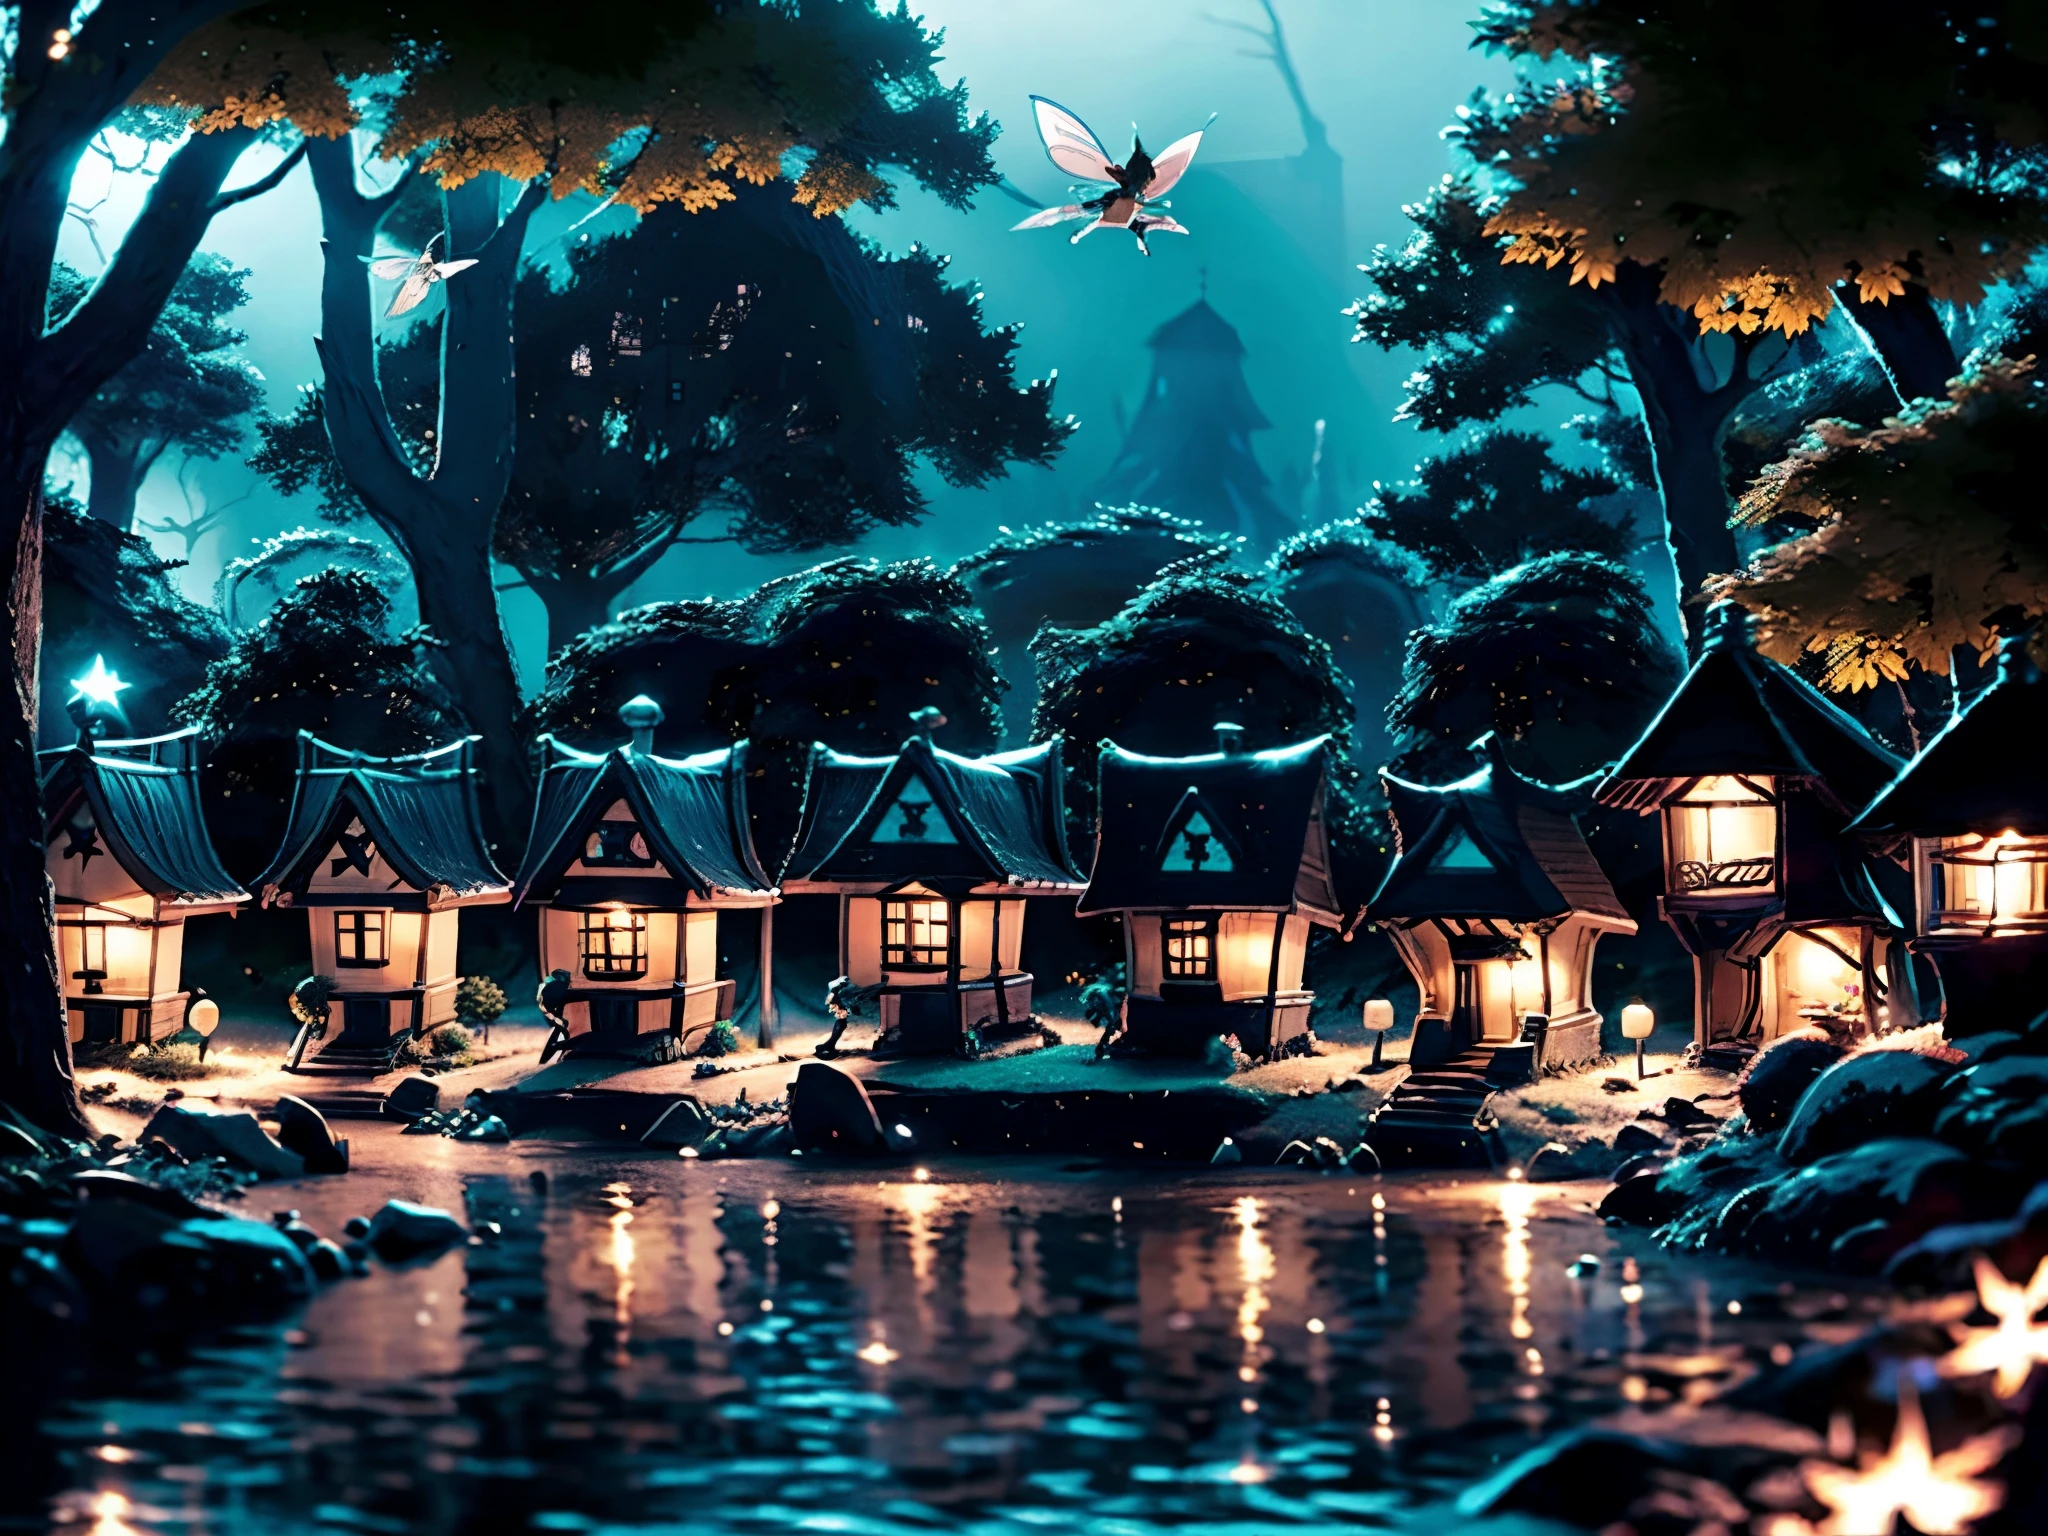 ((Night time forest)), (((tiny village build in the trees))), (((tiny winged fairies flying around))), ((small tree houses)), pretty fairies, lights, multiple small figures, build inside or on trees